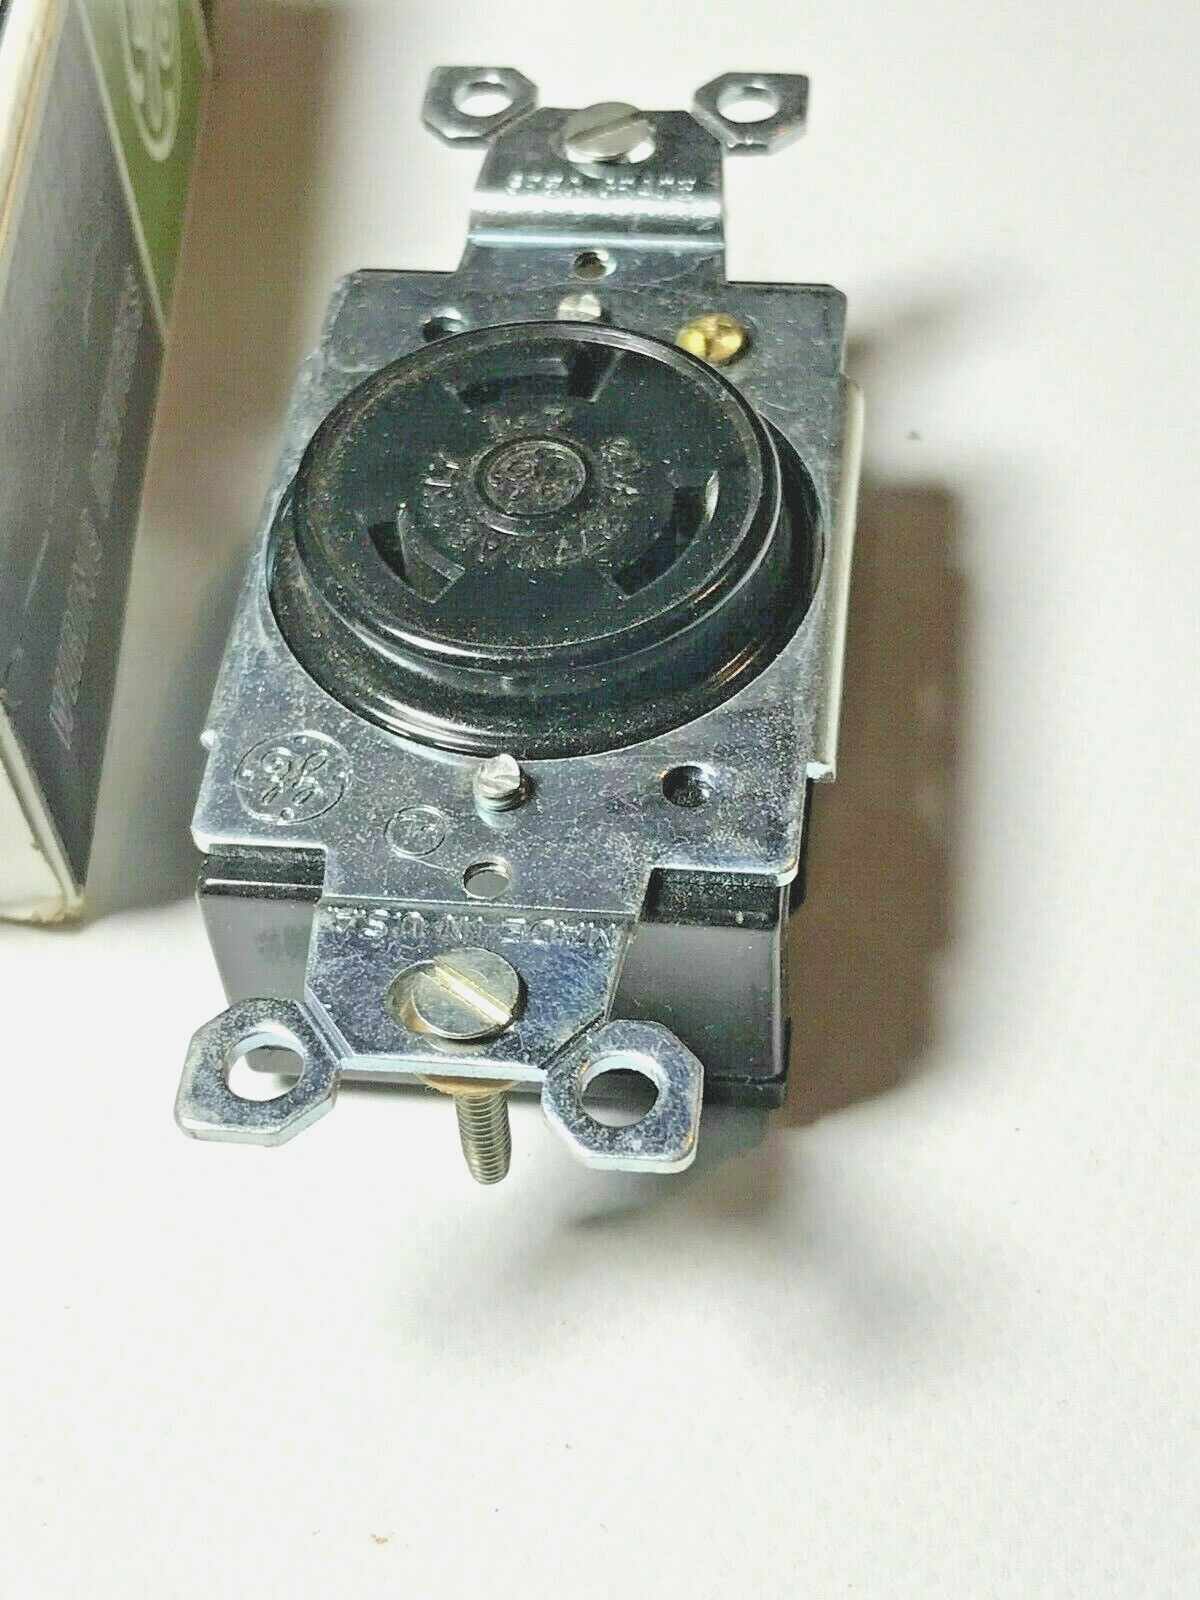 NEW IN Courier shipping At the price free BOX GENERAL ELECTRIC GL0720 Black LOCKING RECEPTA GL-0720